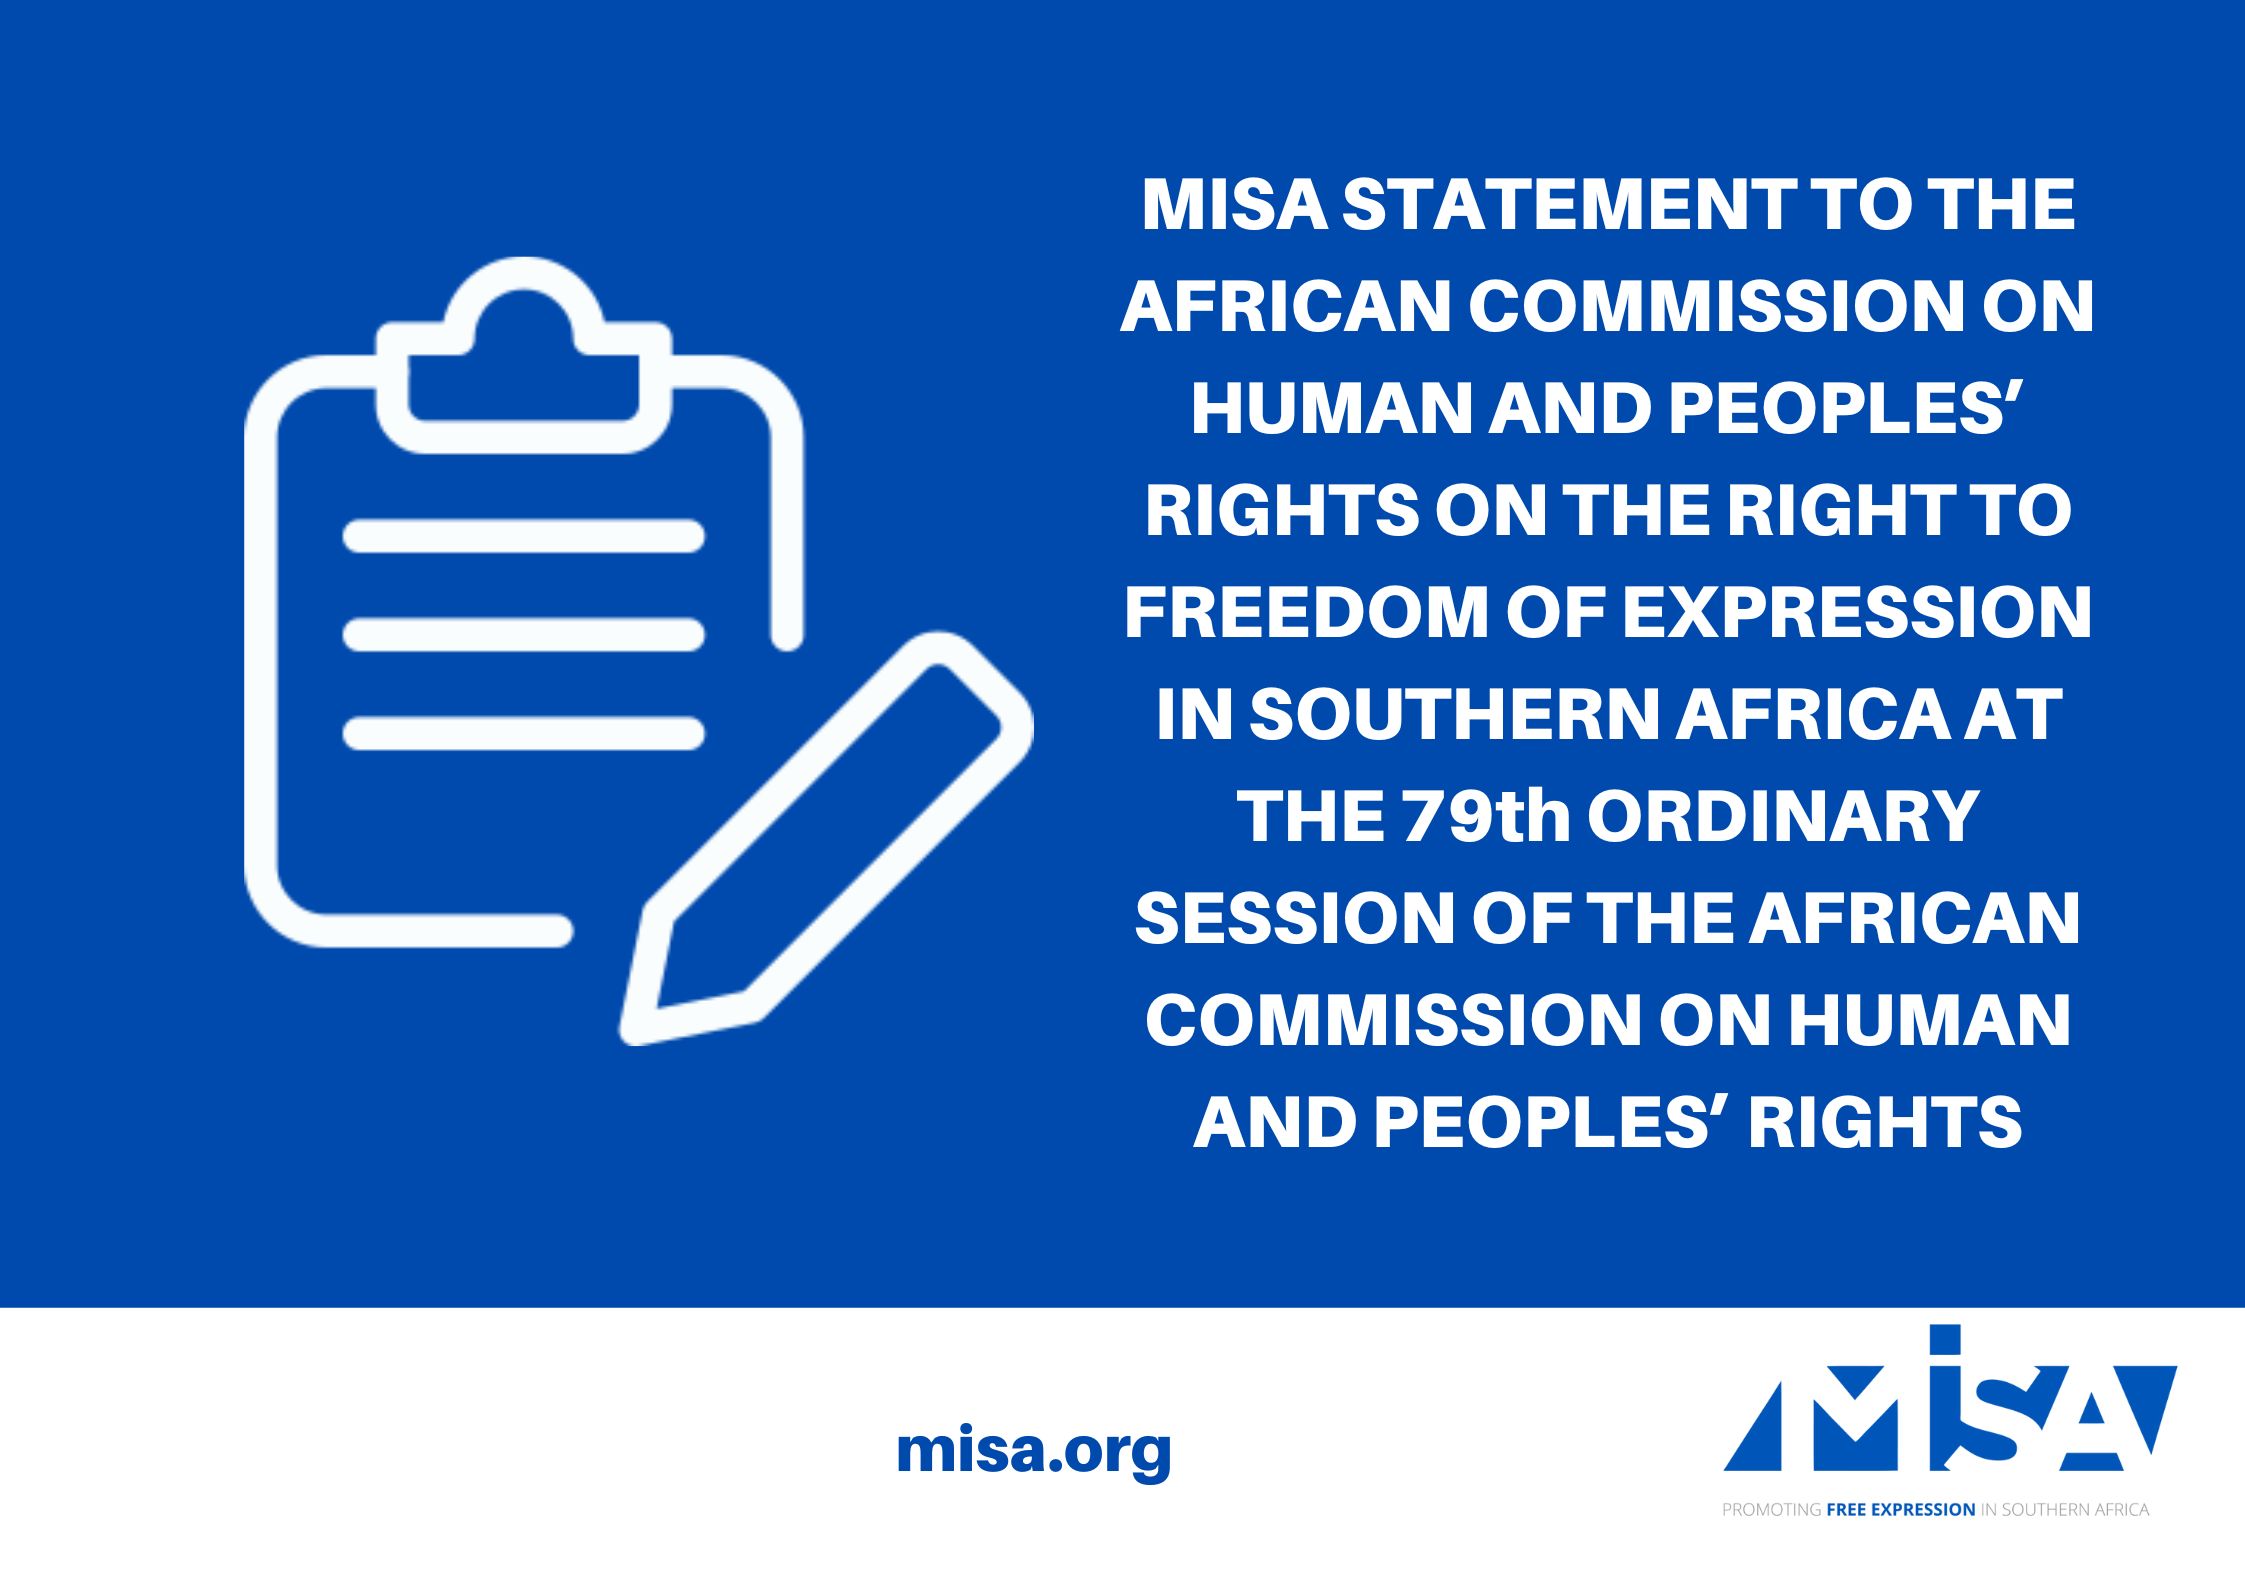 MISA STATEMENT TO THE AFRICAN COMMISSION ON HUMAN AND PEOPLES’ RIGHTS ON THE RIGHT TO FREEDOM OF EXPRESSION IN SOUTHERN AFRICA AT THE 79th ORDINARY SESSION OF THE AFRICAN COMMISSION ON HUMAN AND PEOPLES’ RIGHTS